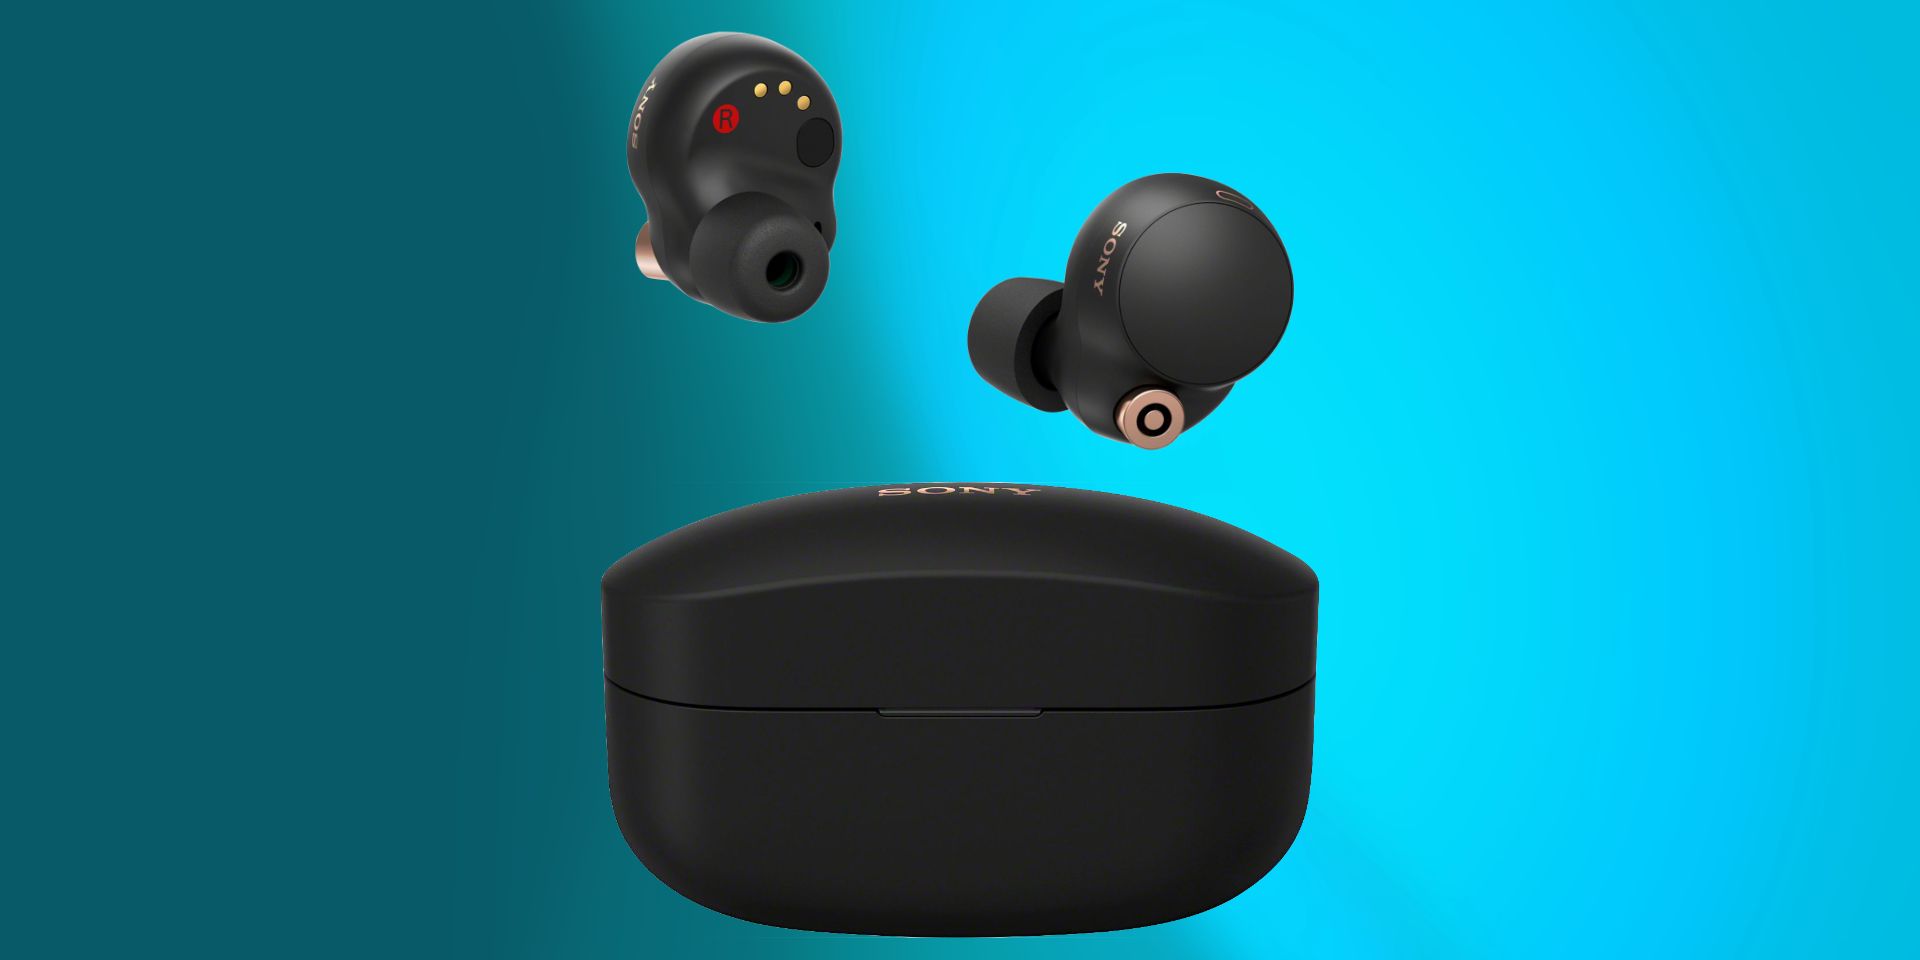 Sony WF-1000XM4 Earbuds Price, Features & Specs: What You Need To Know